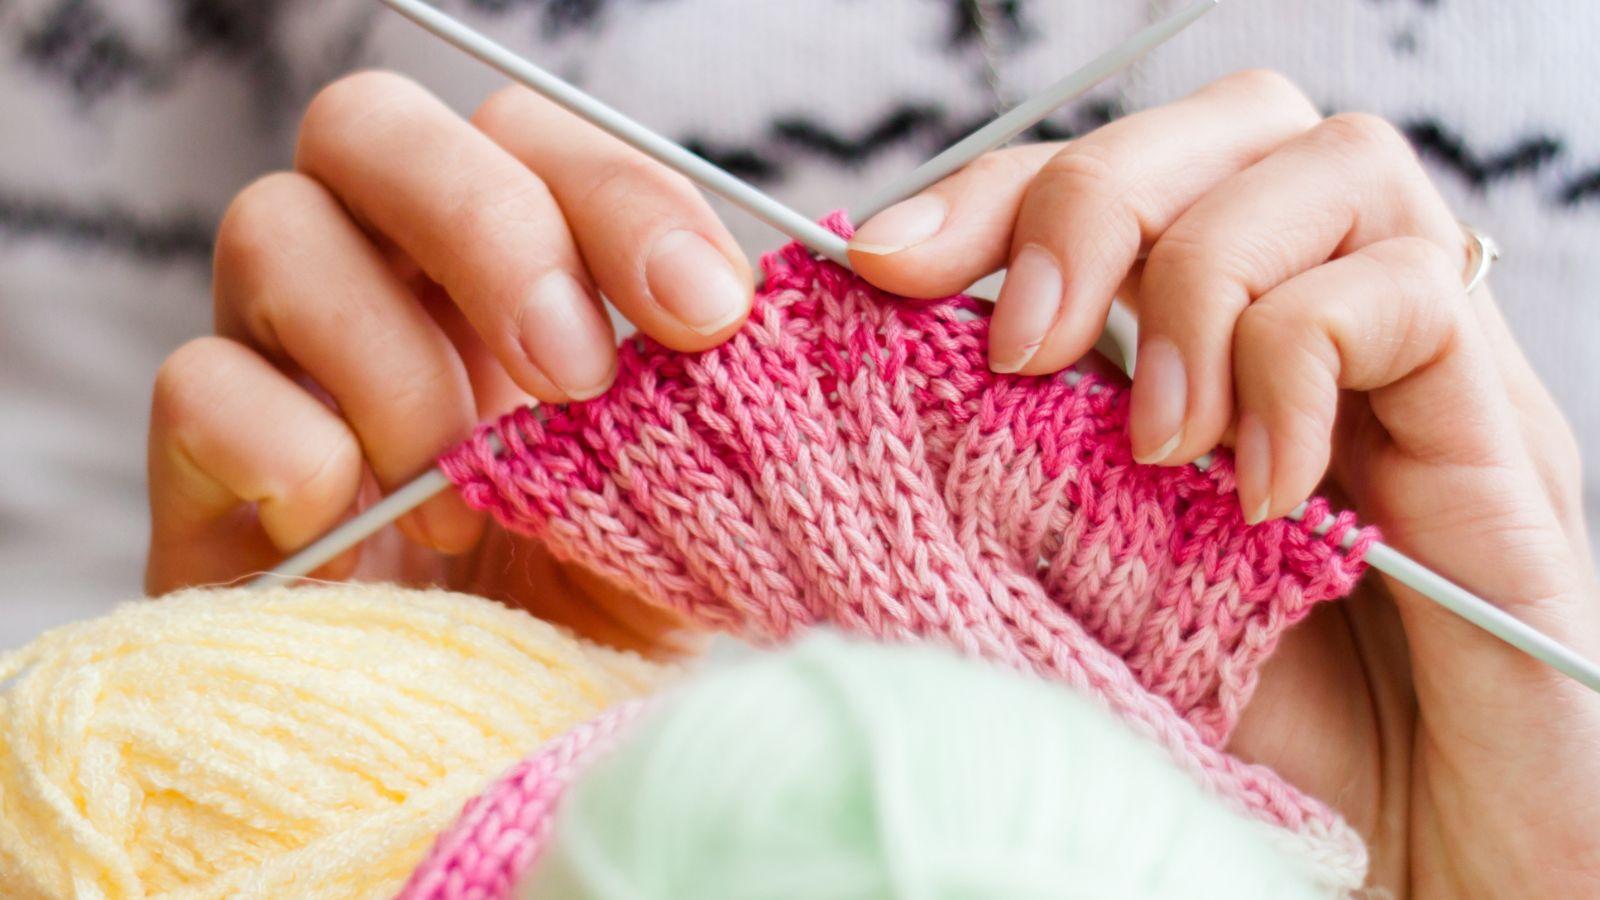 overcome stress image of woman knitting a pink scarf